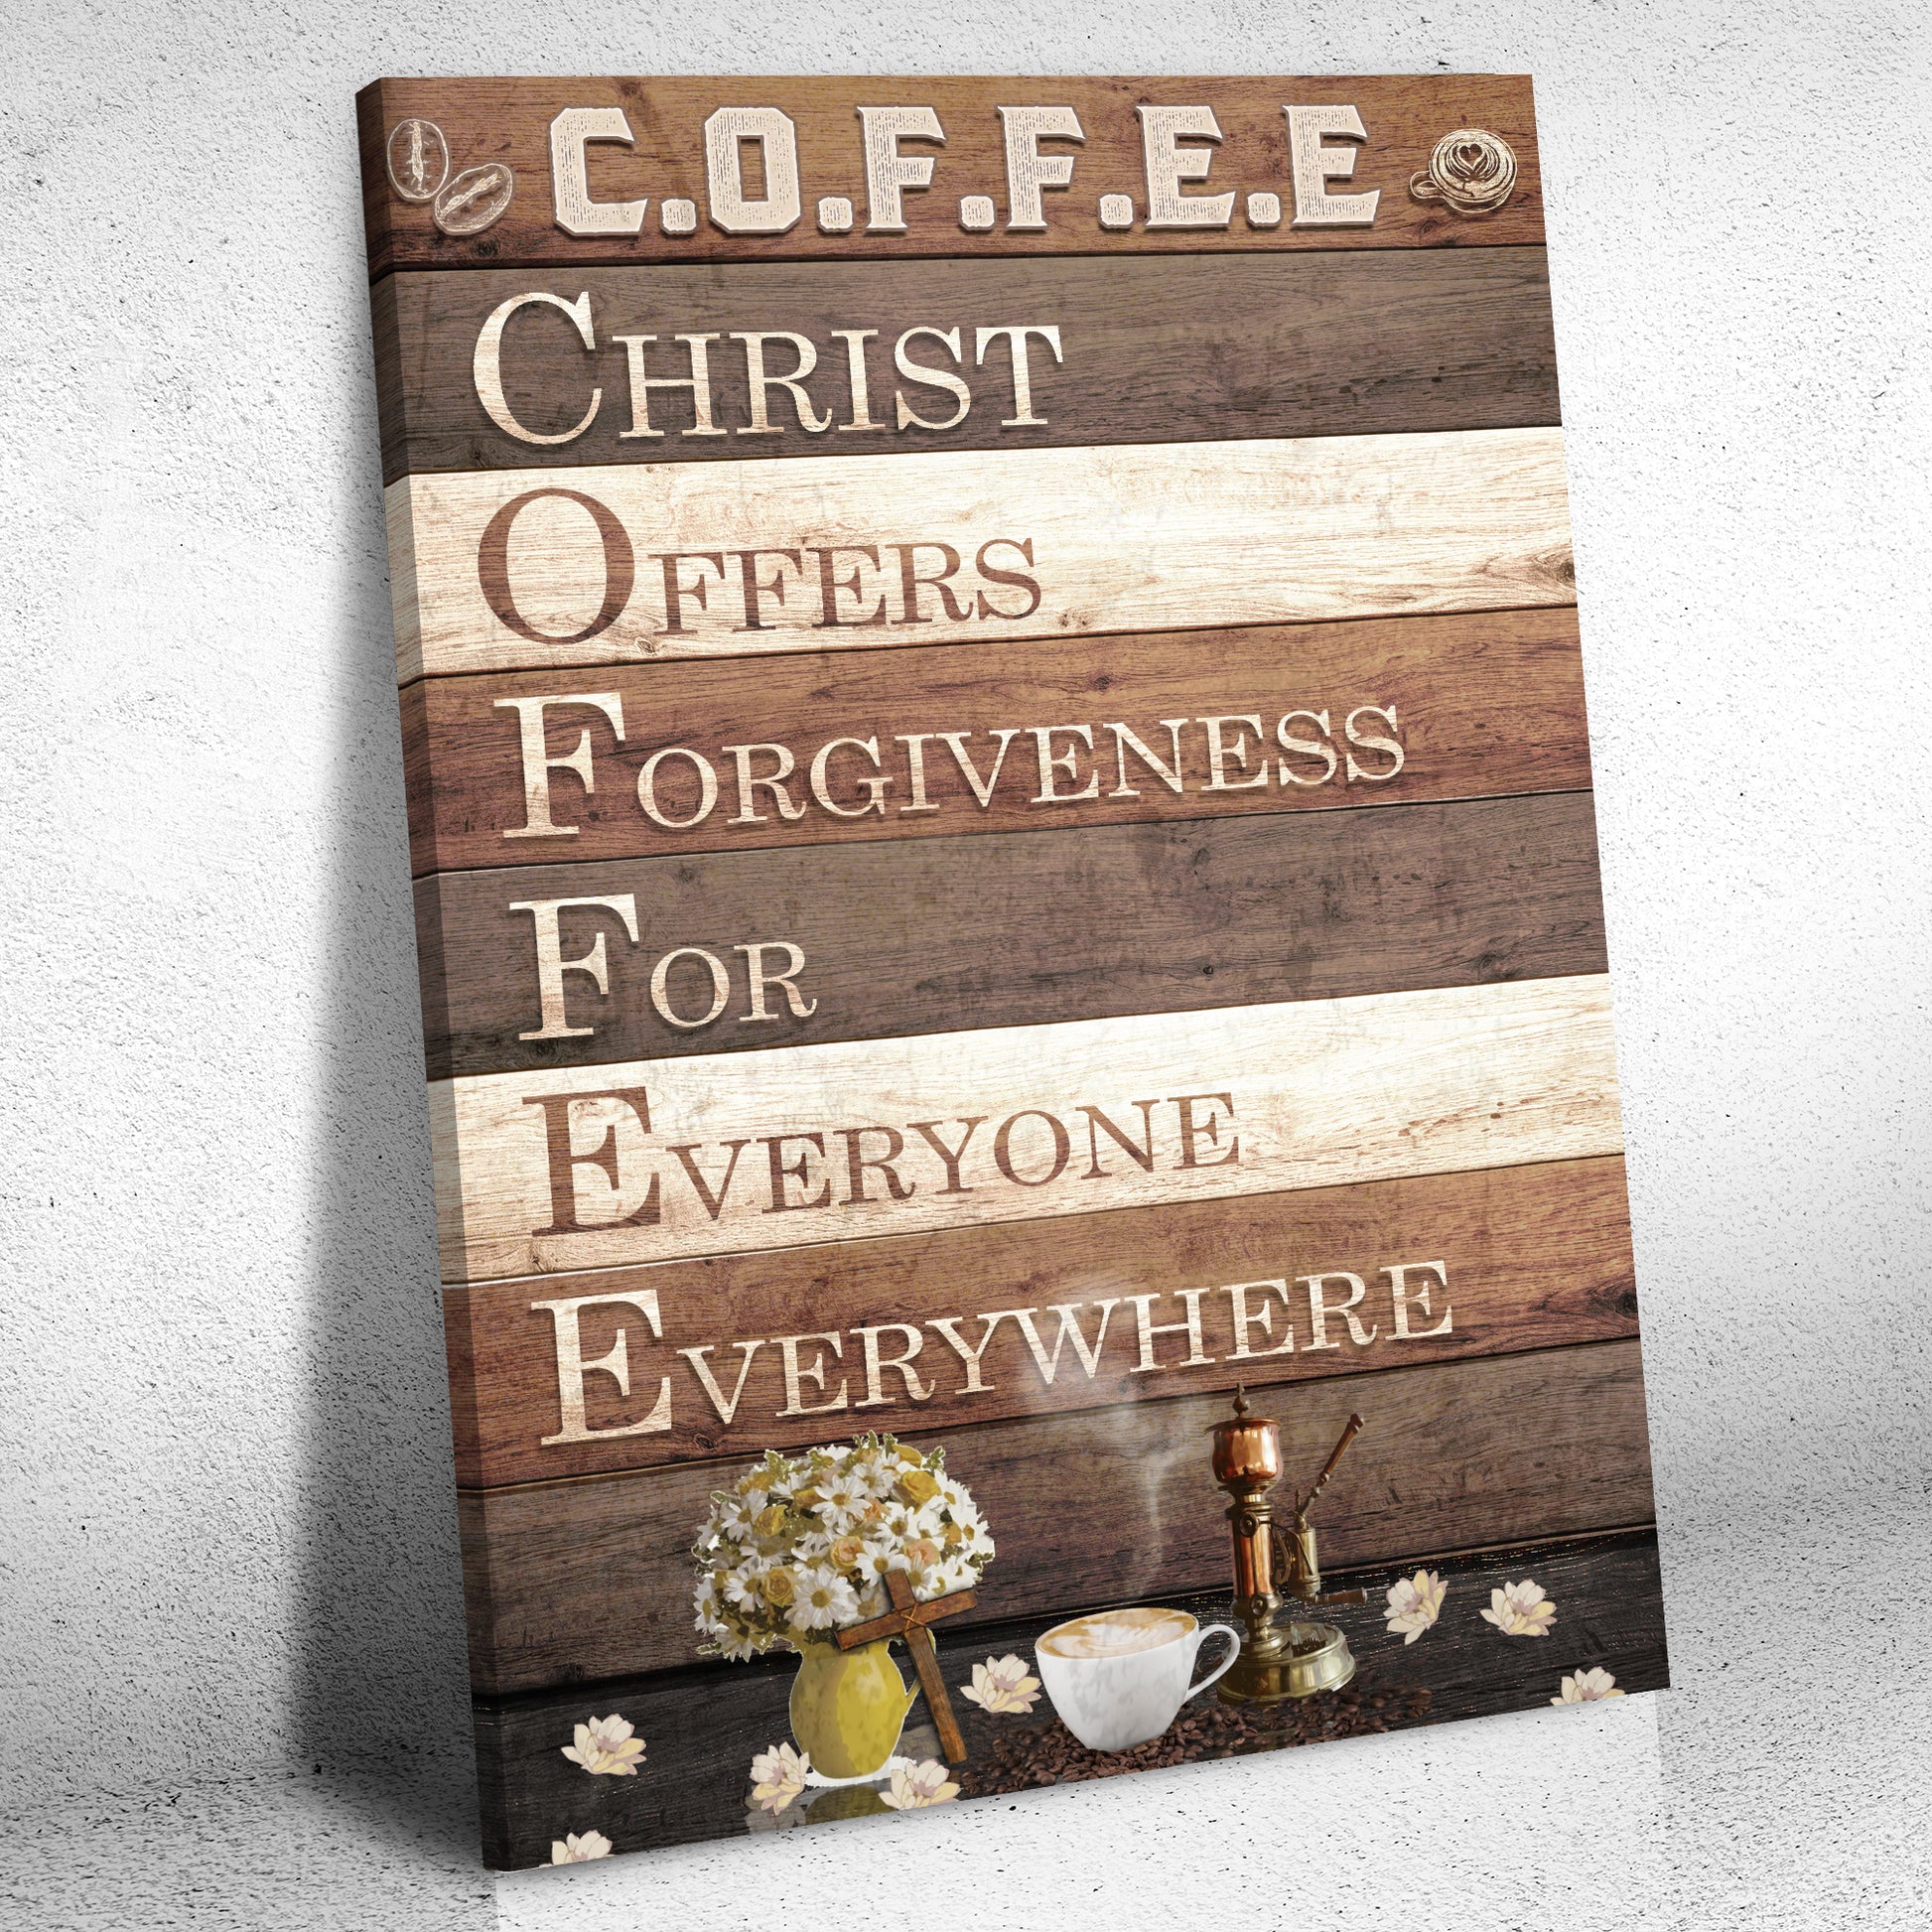 Christ And Coffee Sign - Image by Tailored Canvases